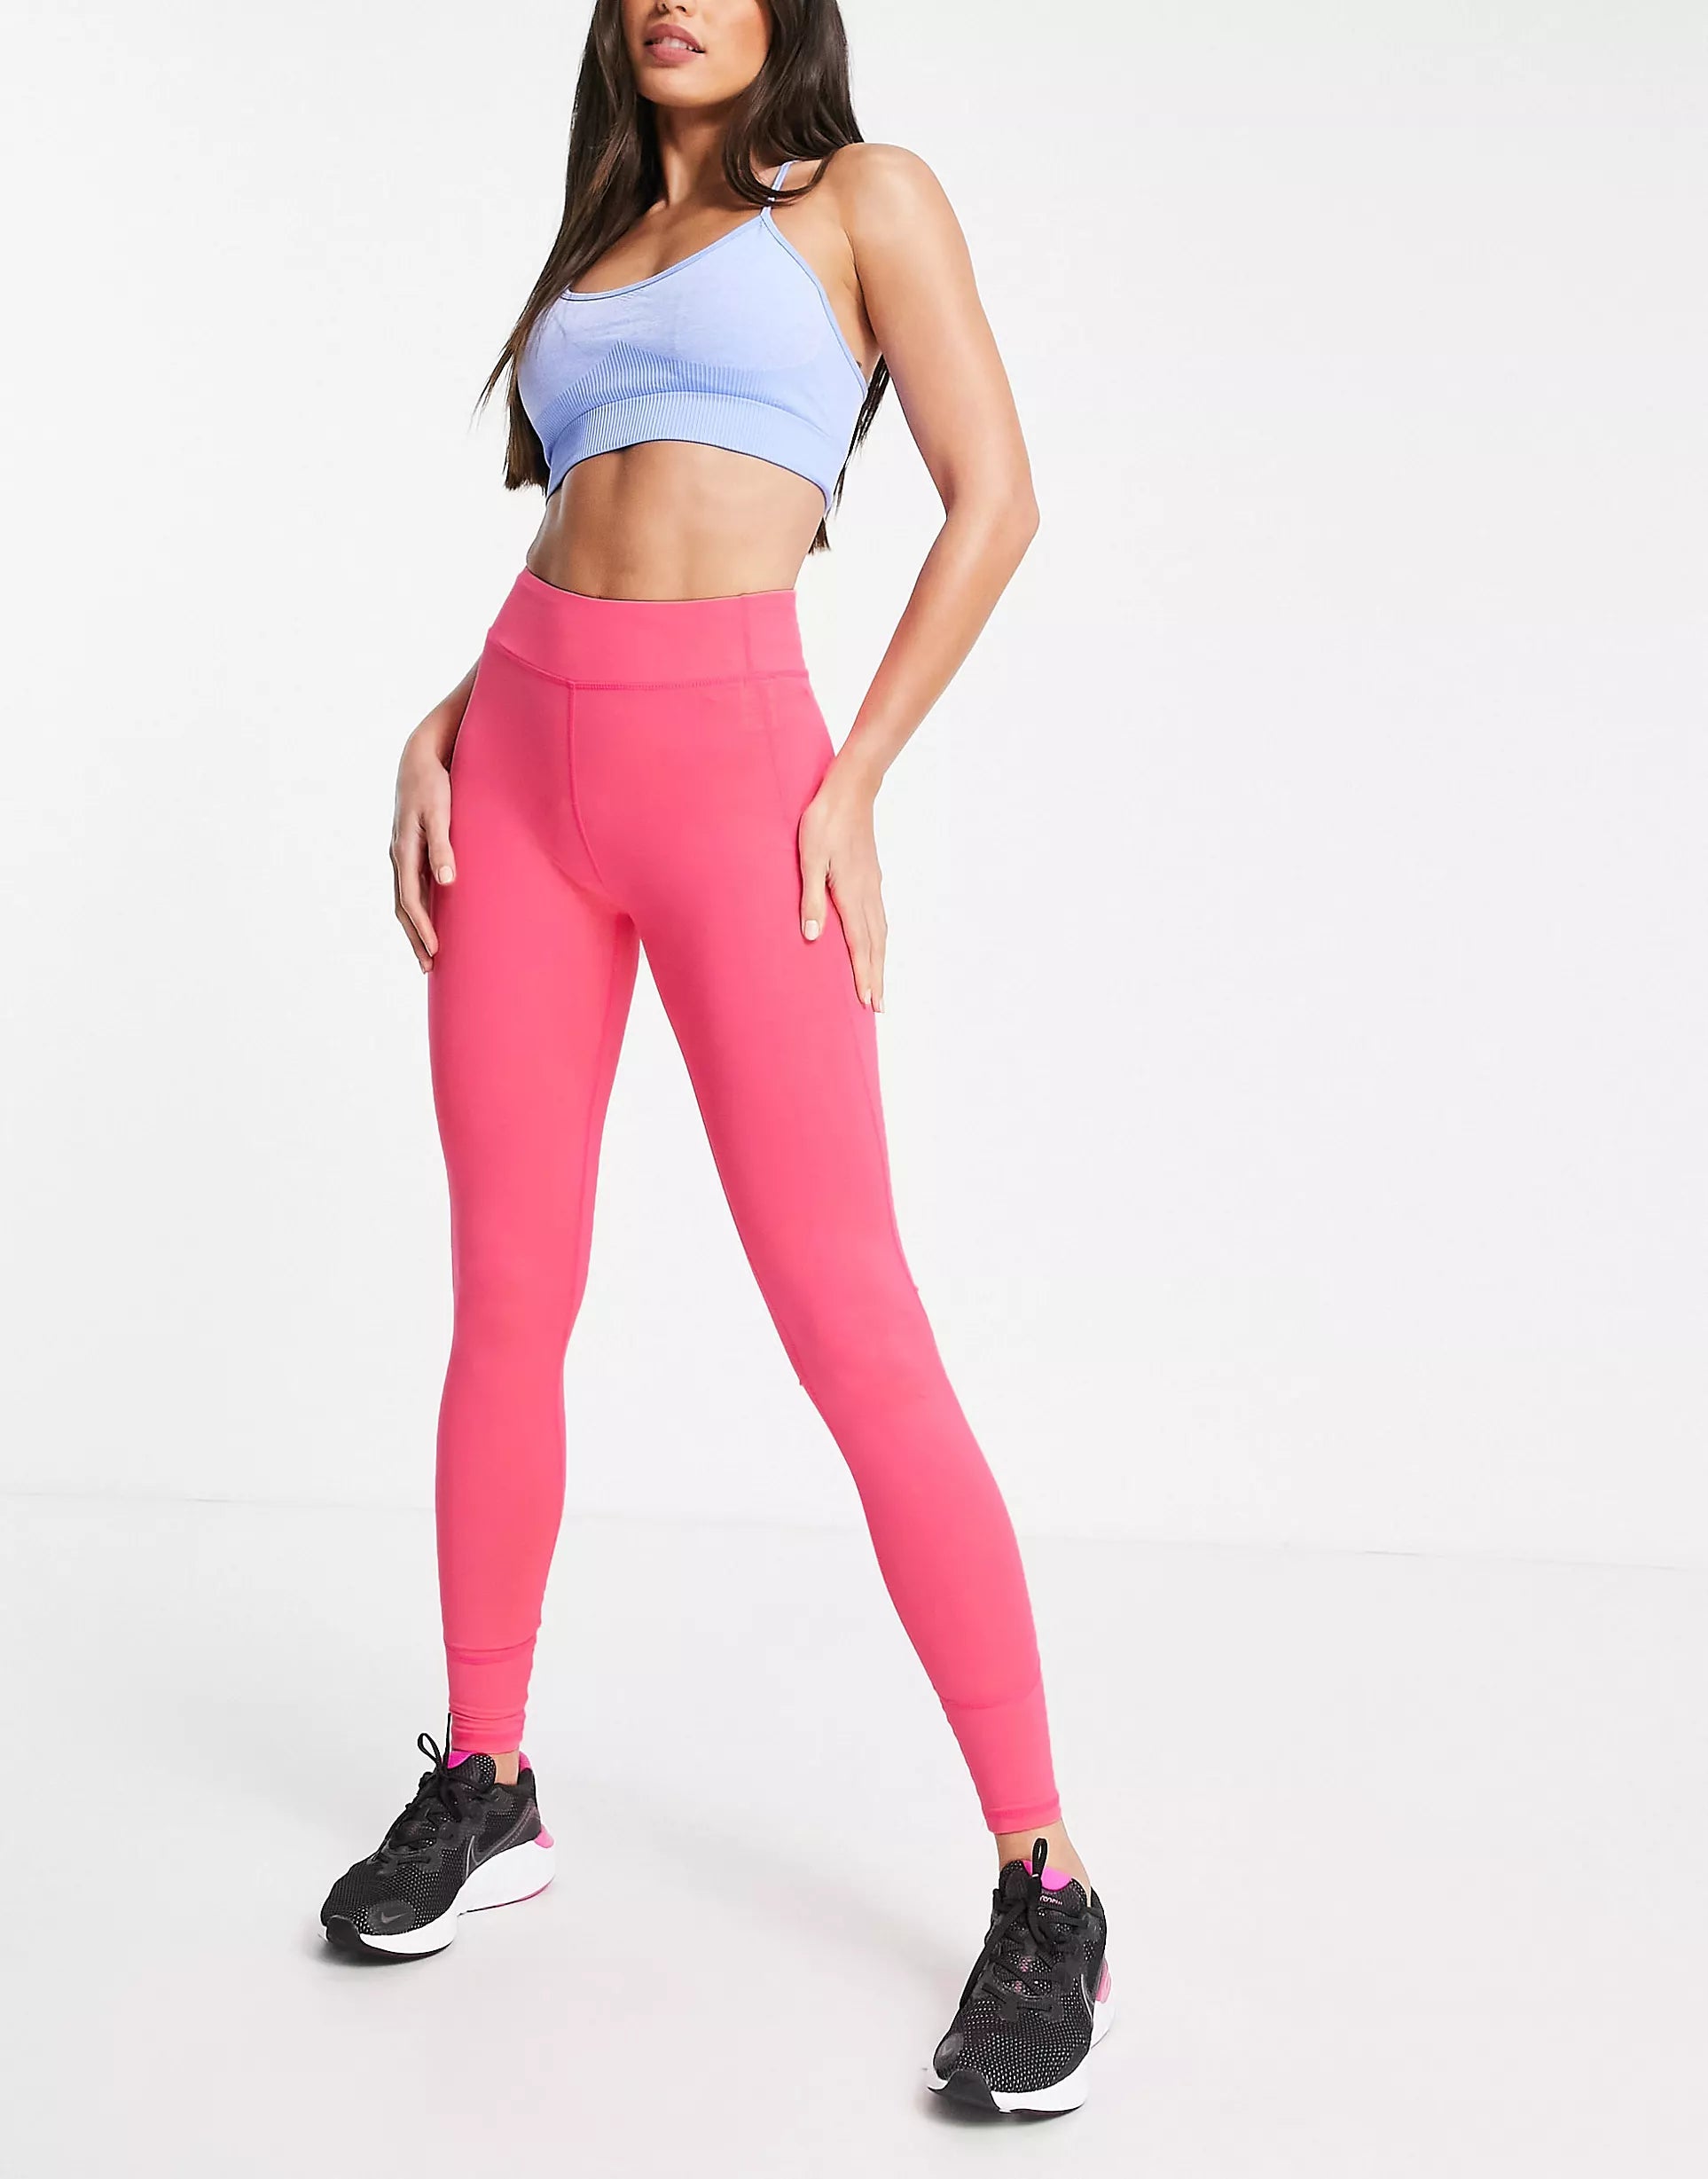 (Product 10) Sample - Gym Outfits and Accessories For Sale